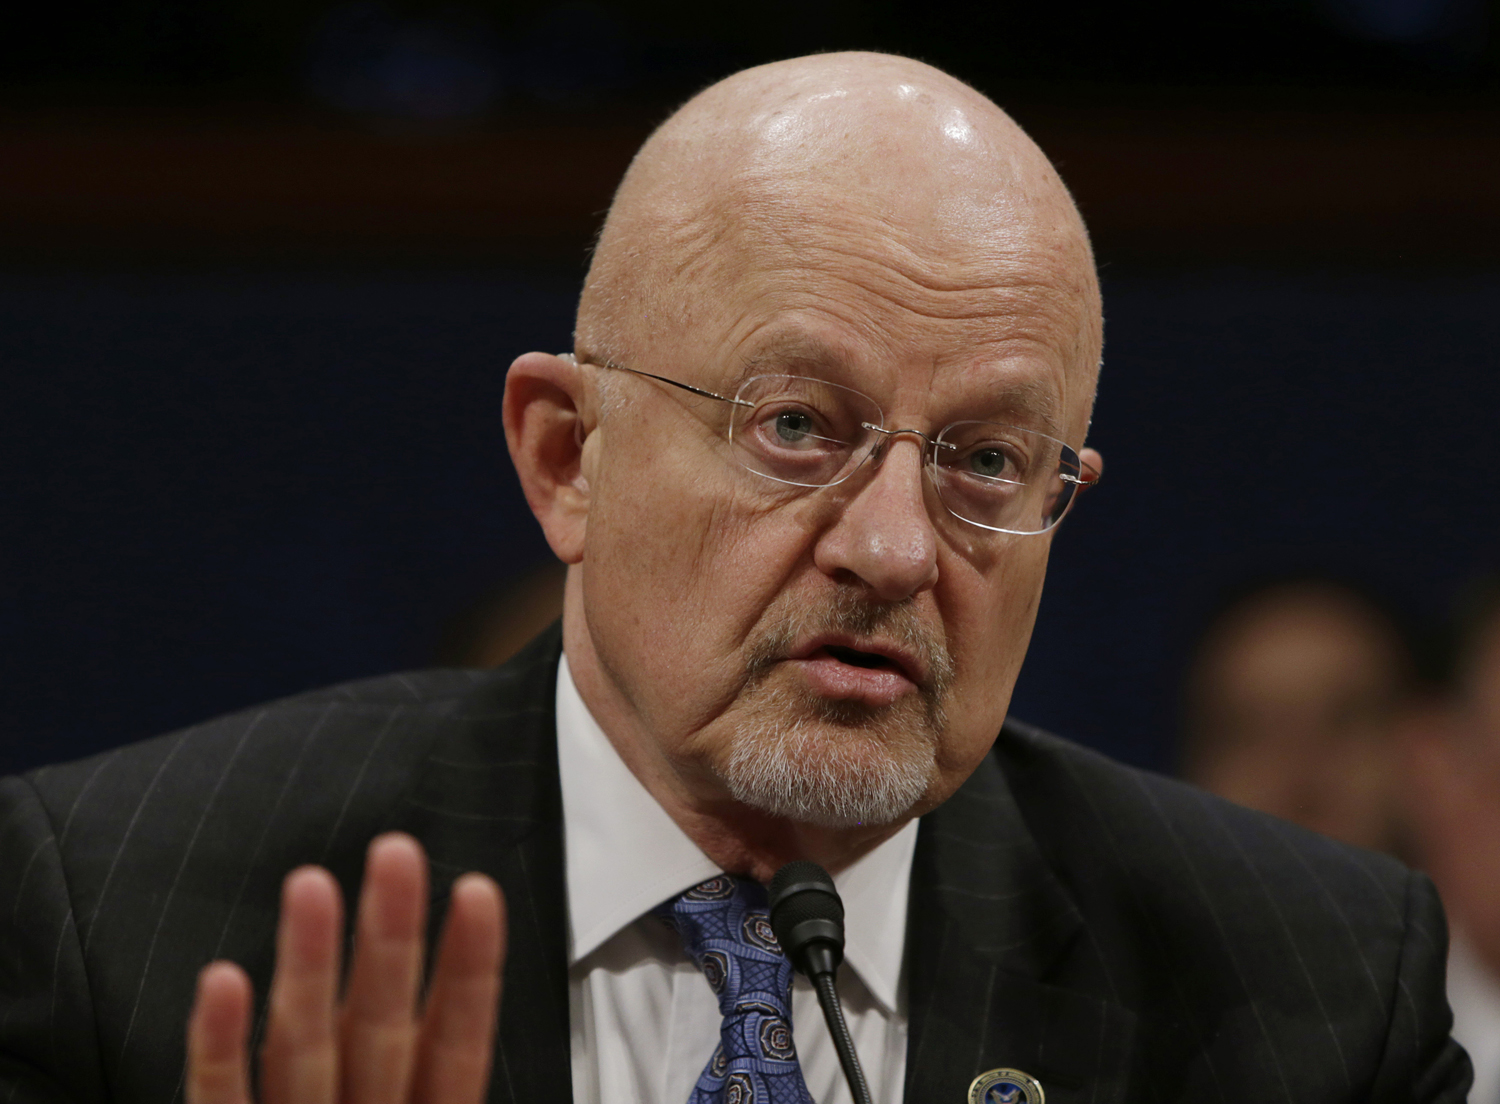 Director of U.S. National Intelligence James Clapper appears before the House Intelligence Committee on 